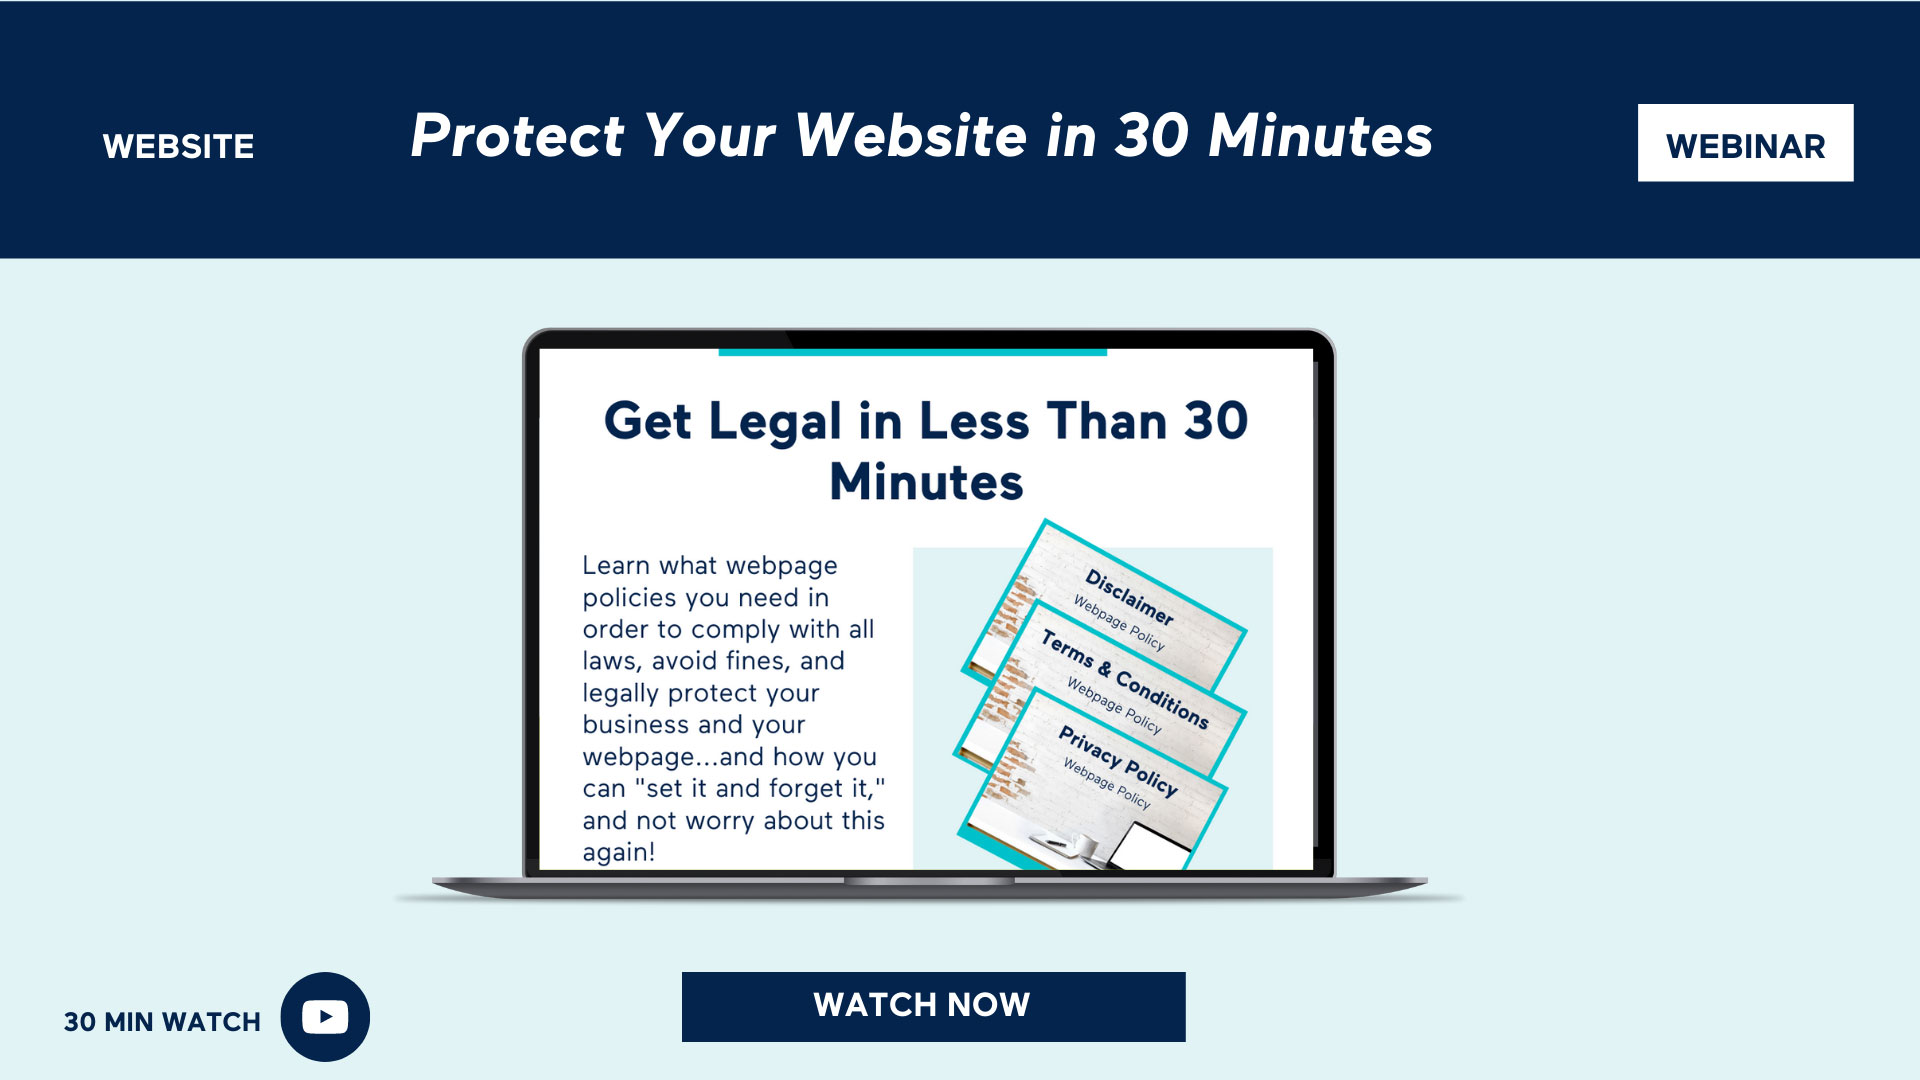 Get Legal in 30 Minutes